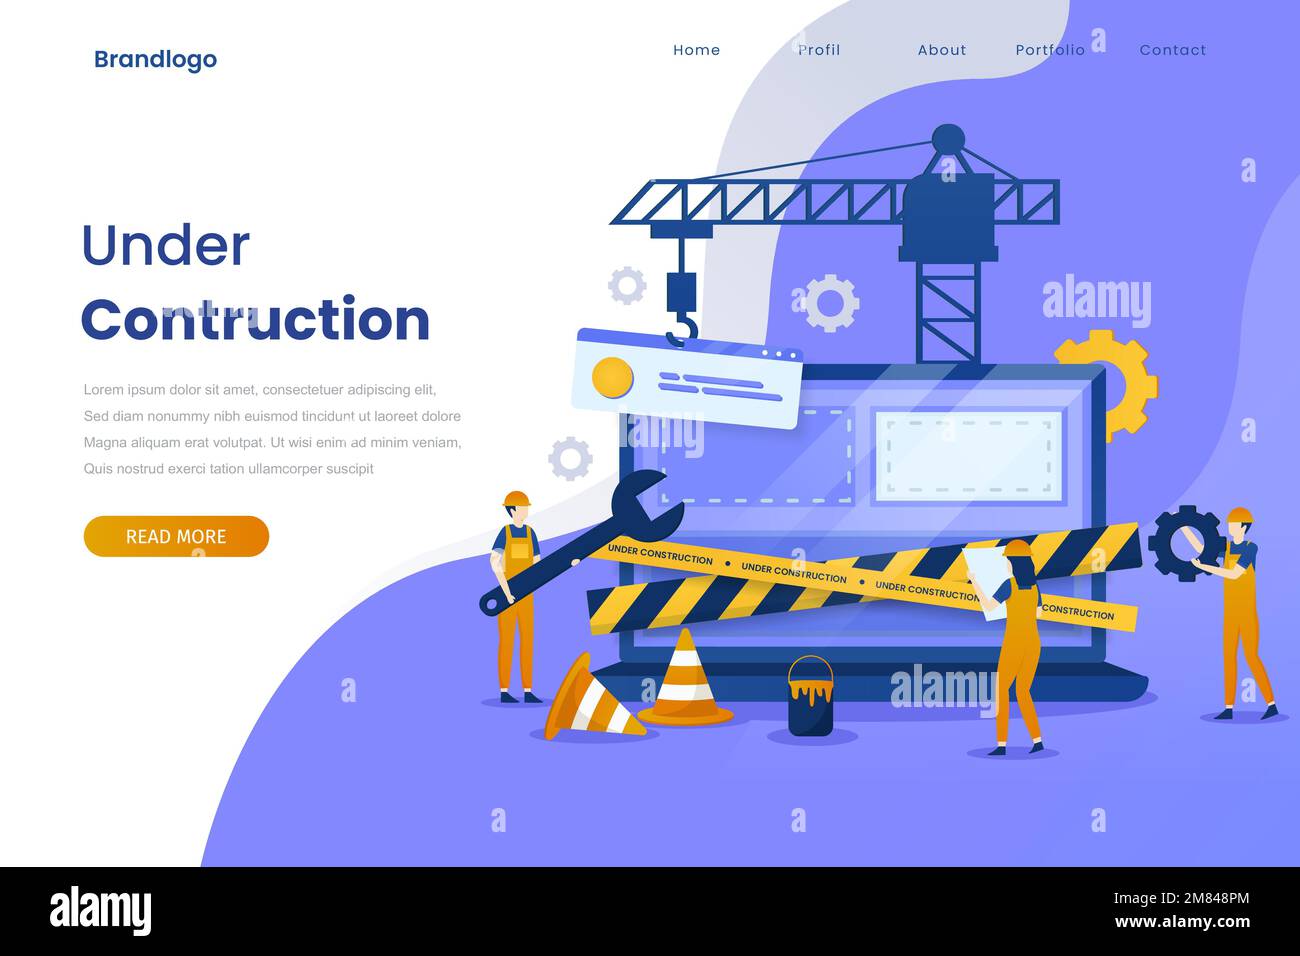 Under construction landing page illustration template. Illustration for websites, landing pages, mobile applications, posters and banners Stock Vector